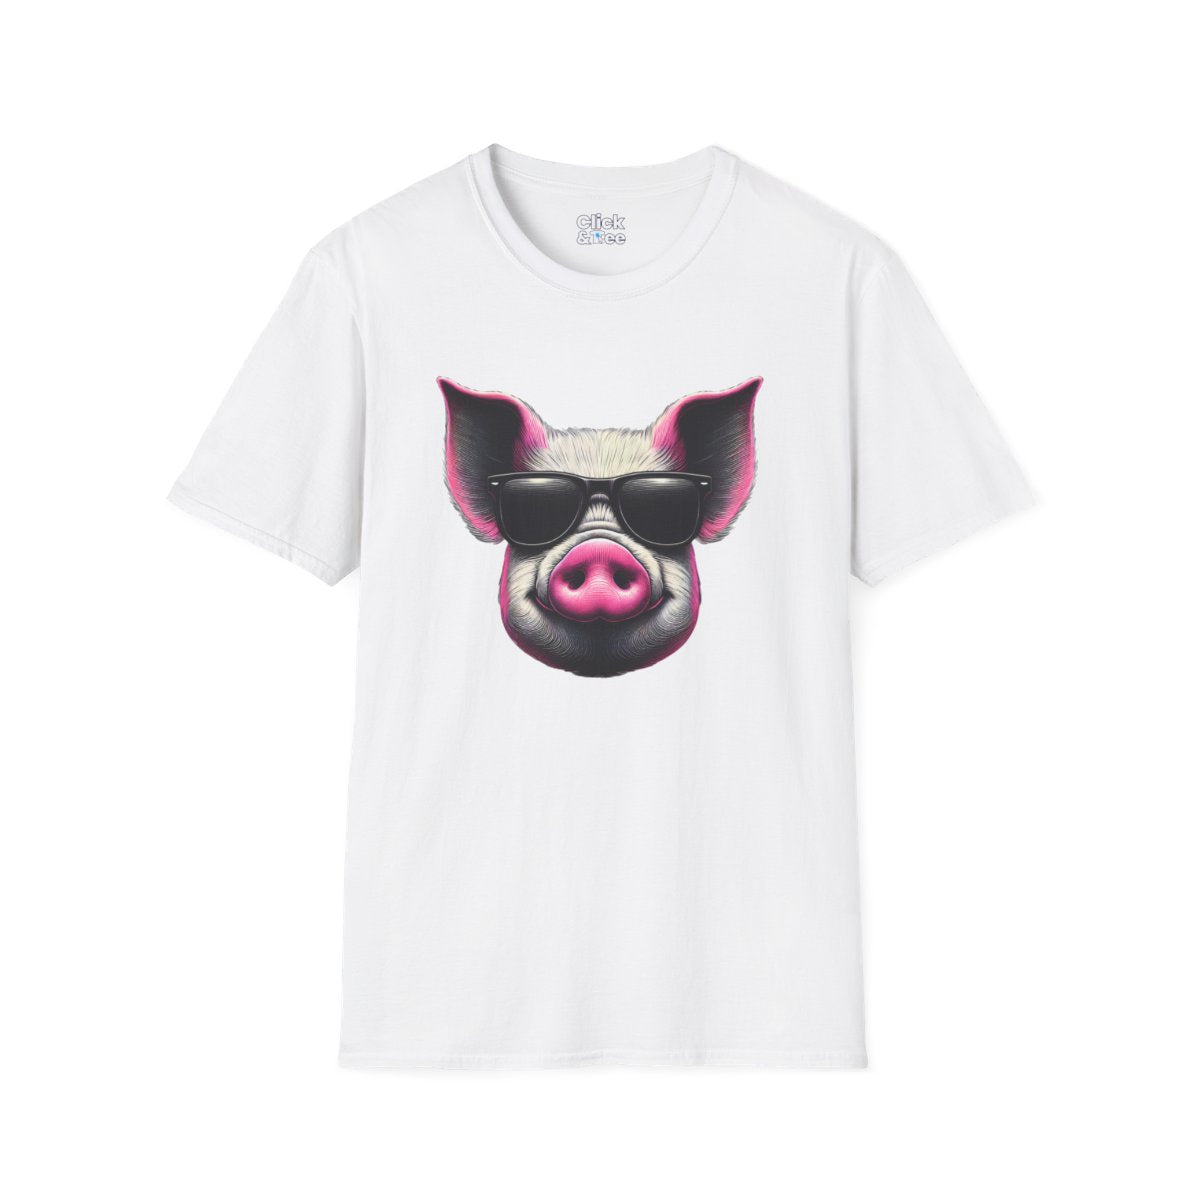 Graphic ArtPink Pig Face Tee Image 6